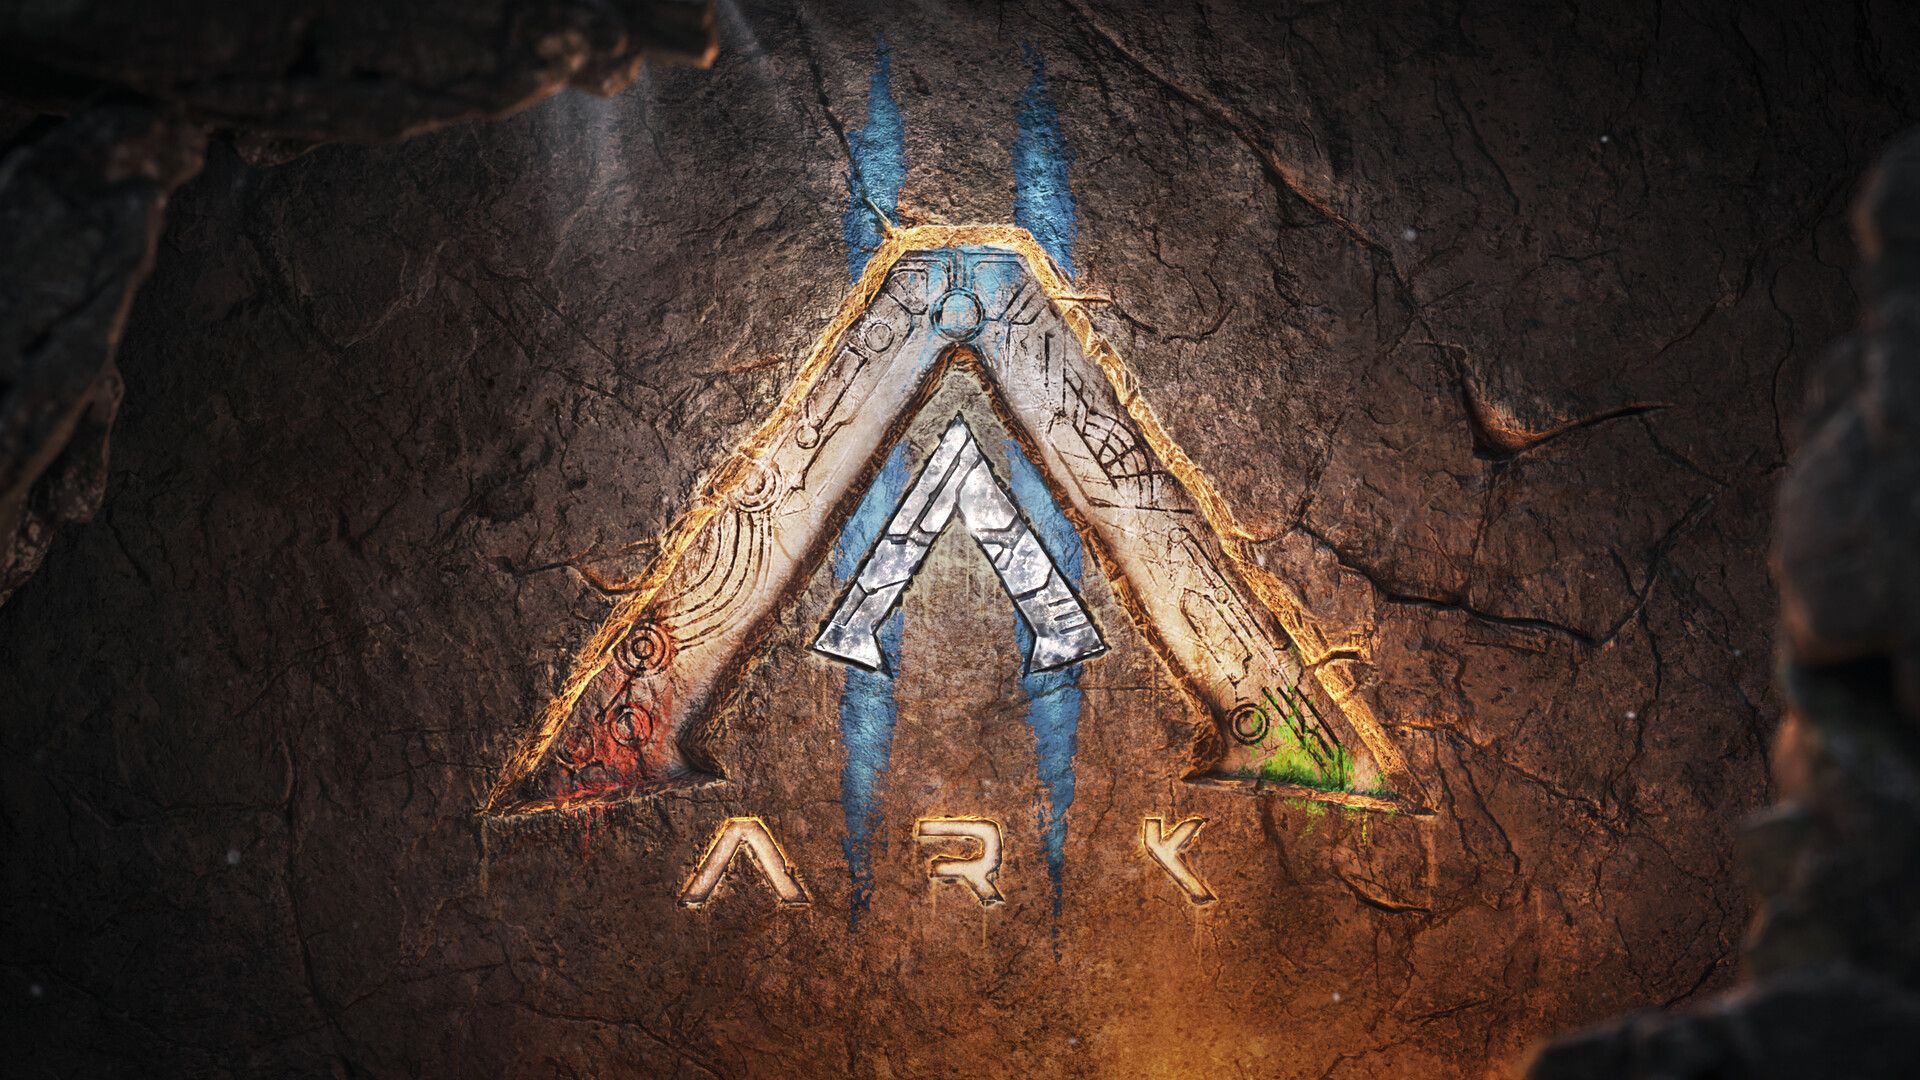 ARK 2 Release Date, Story, Gameplay, and Everything You Wanted to Know.